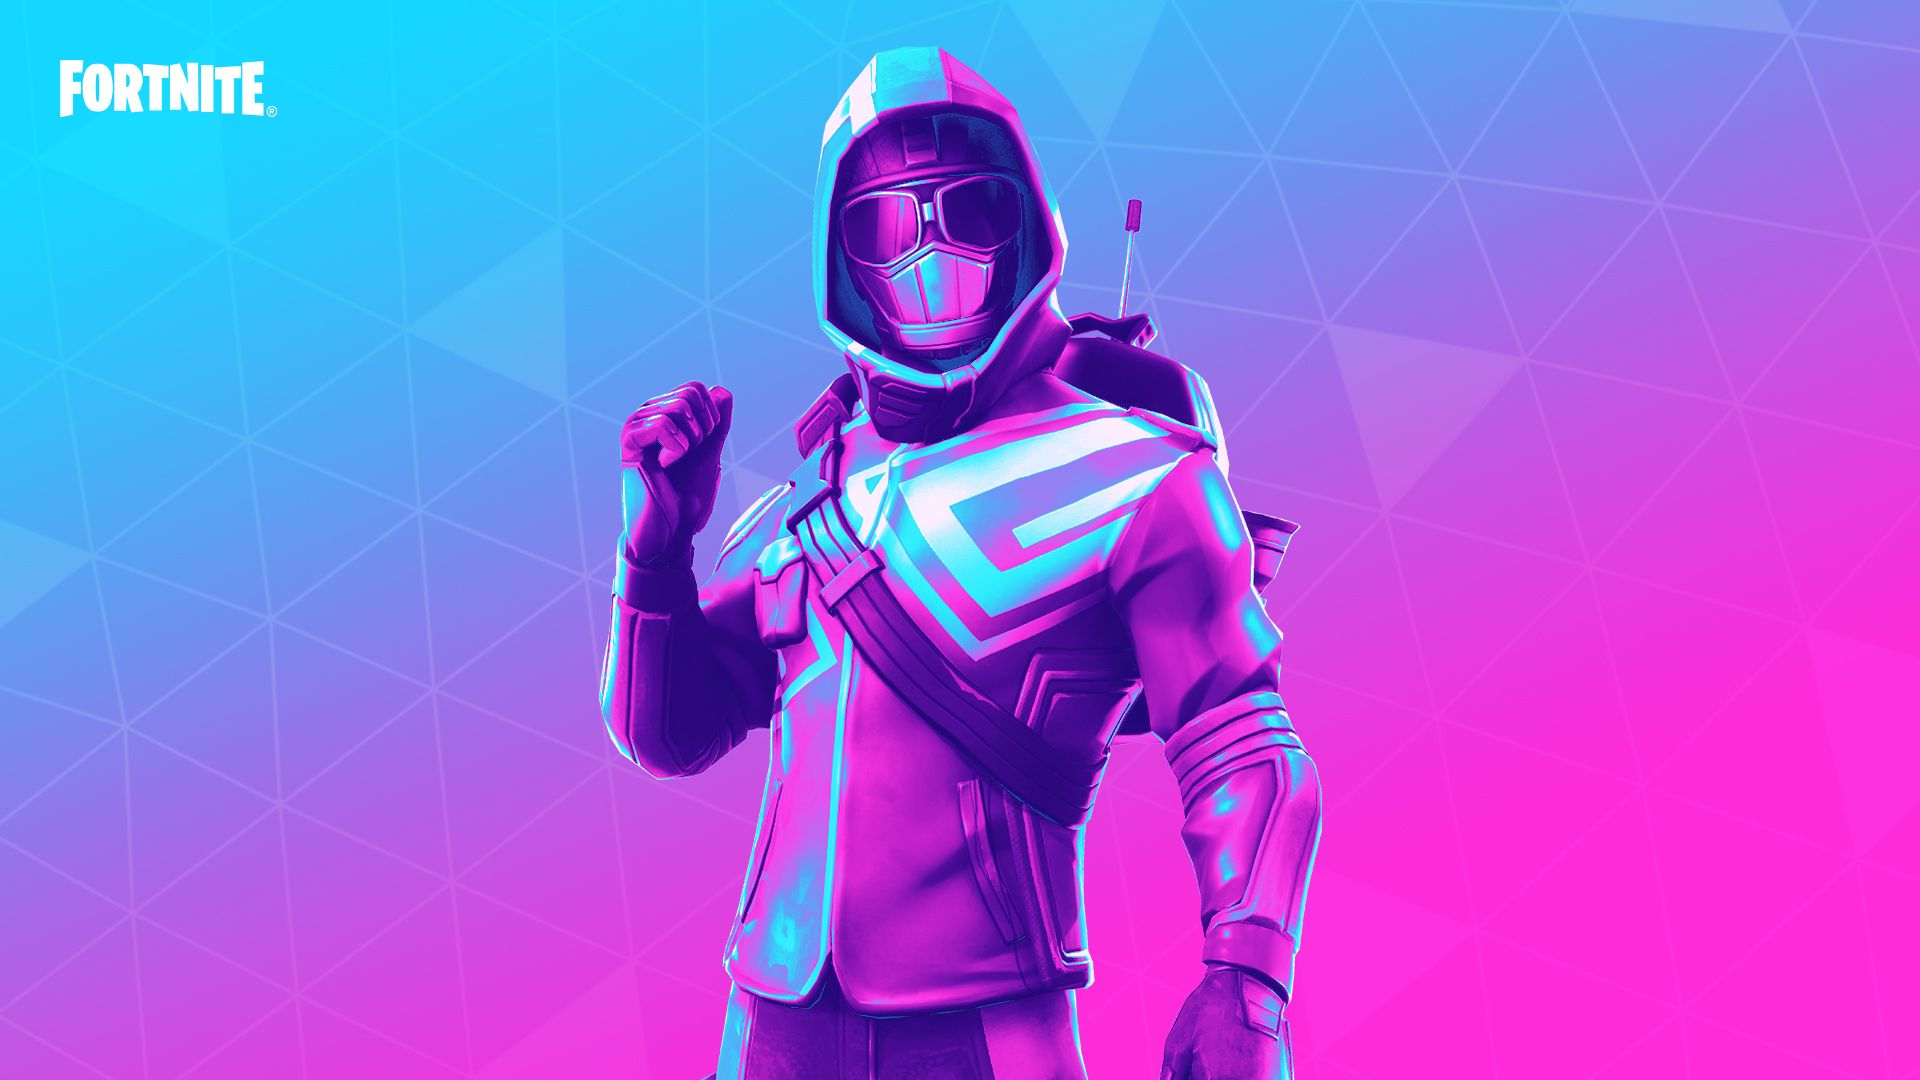 Fortnite Competitive Chapter 2 Season 5 #FNCS Kicks Off This Weekend! Drop In Game Now For A Last Chance To Reach Champion Division By Competing In The Contender Hype Cup